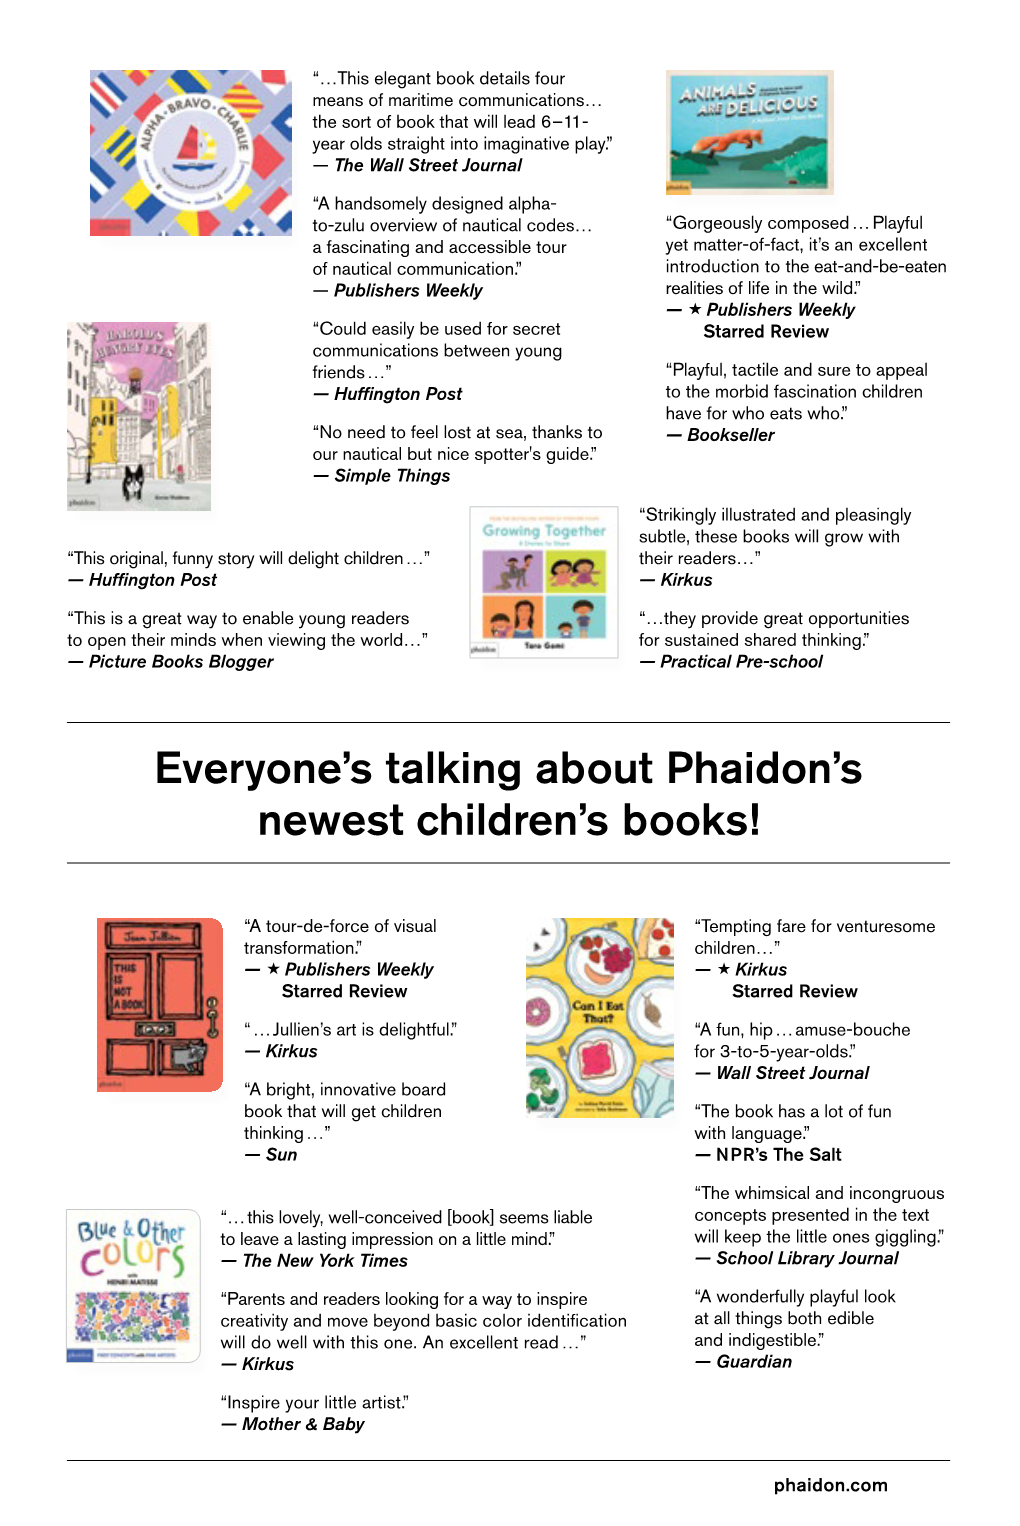 Everyone's Talking About Phaidon's Newest Children's Books!